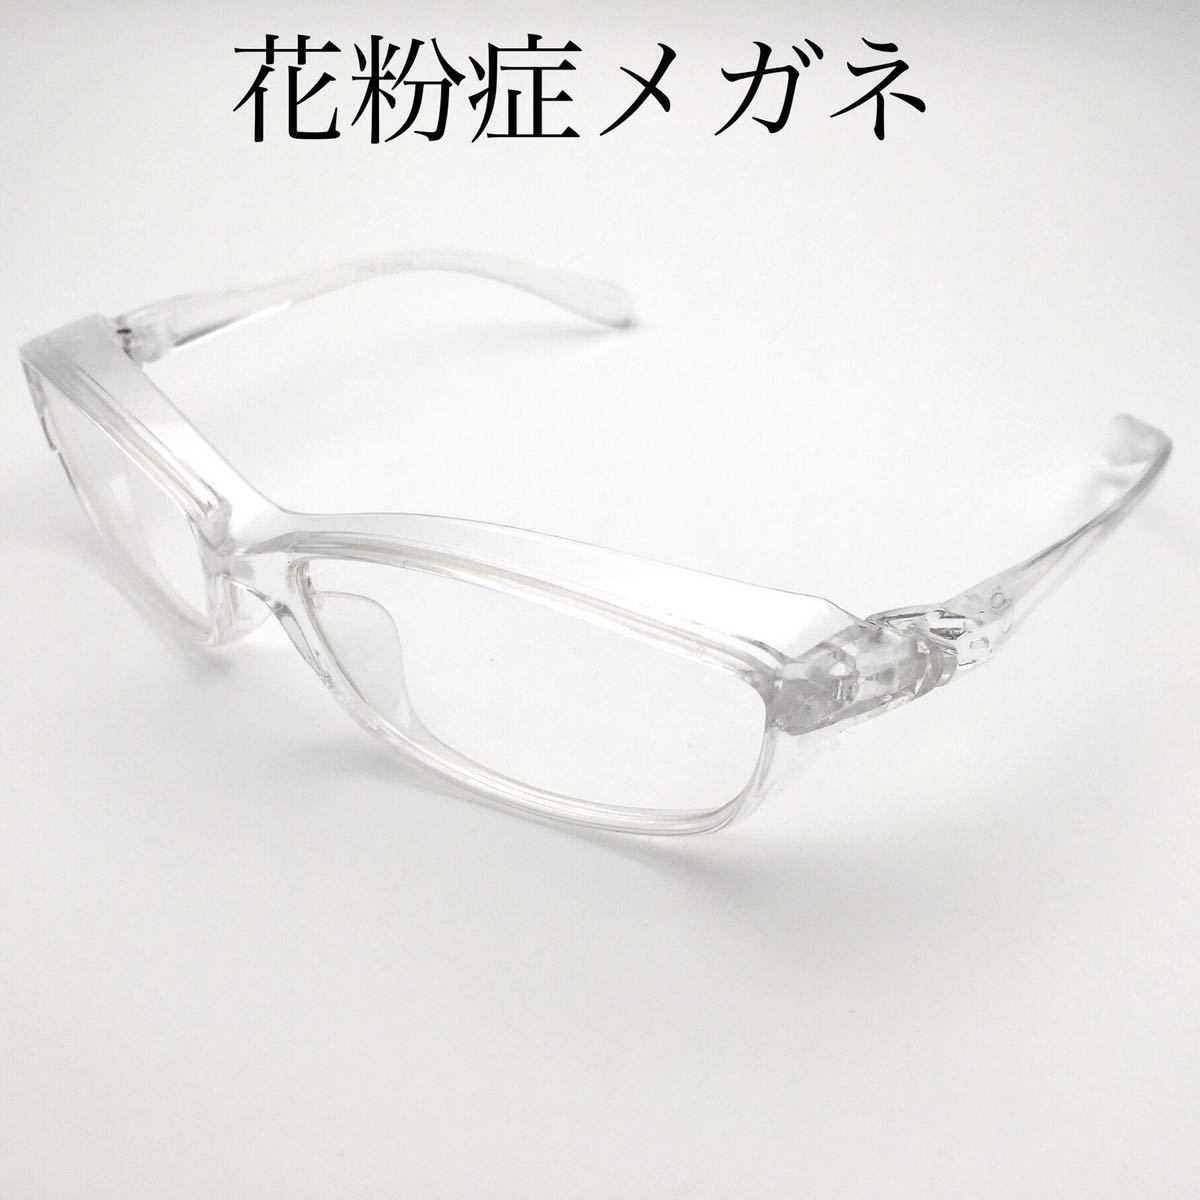  popular commodity! pollen, flour rubbish, ultra-violet rays, spray, have ... thing from eyes ... glasses! standard type clear frame simple . design man and woman use 